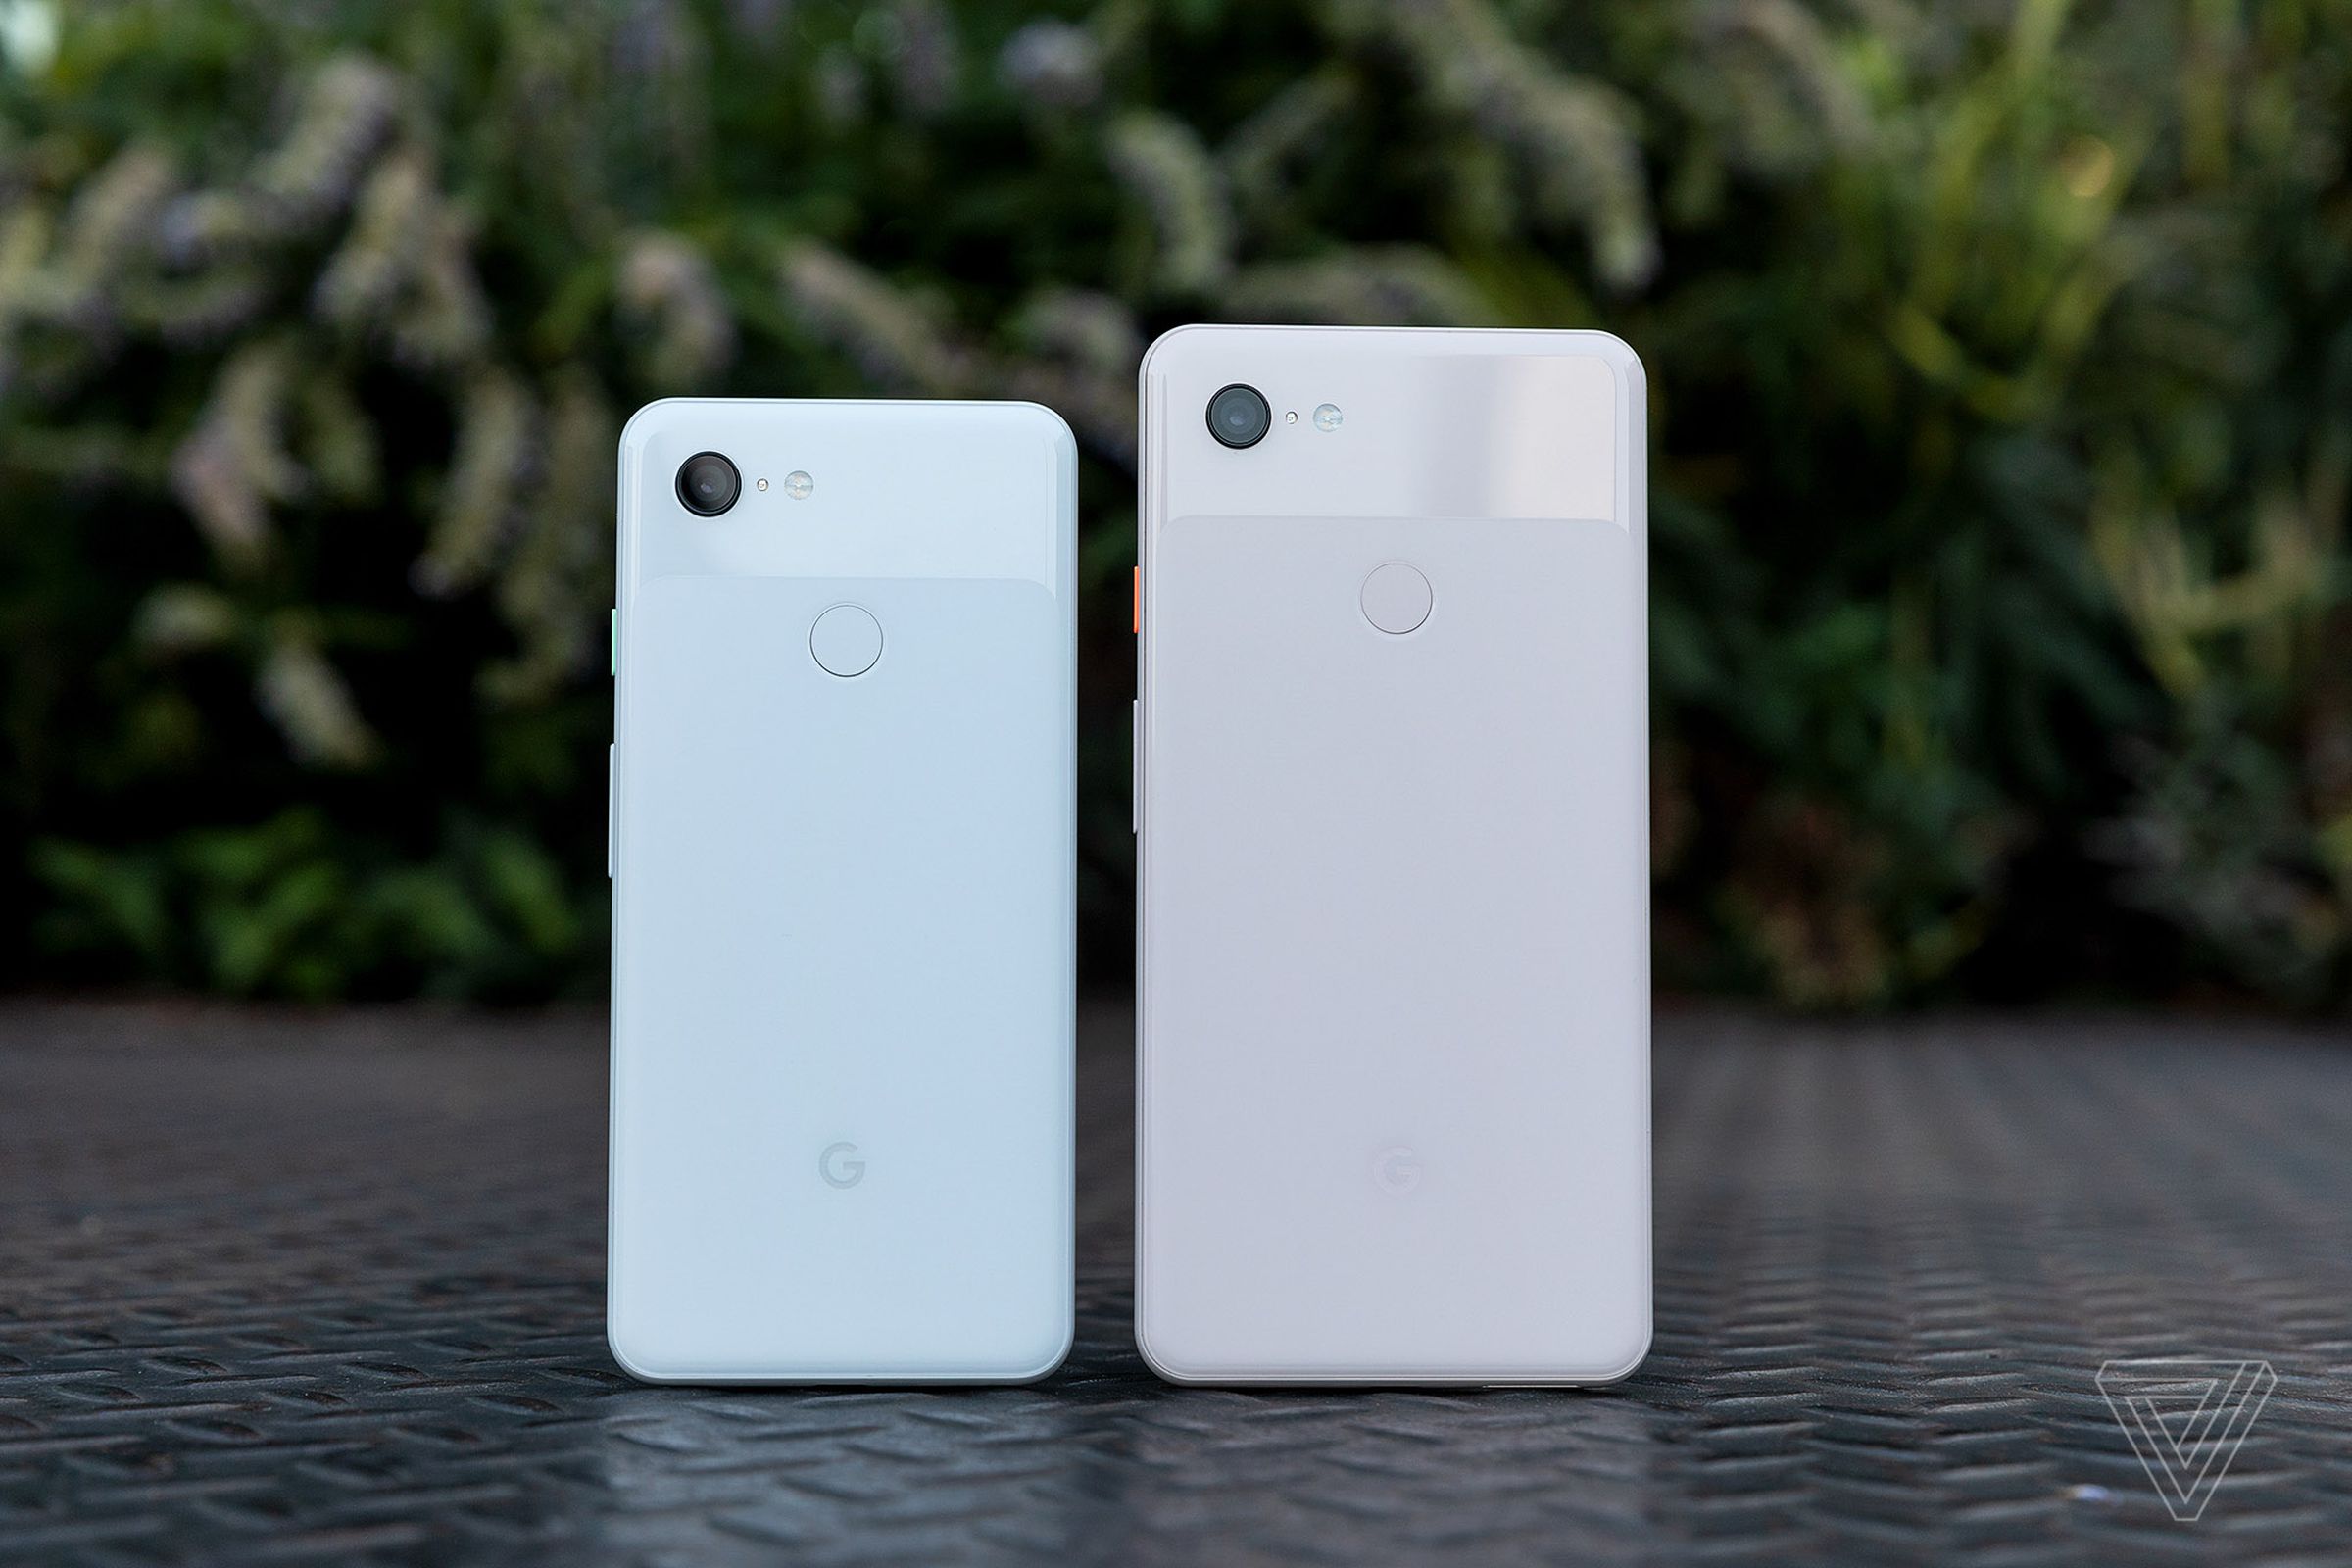 The Pixel 3 and 3 XL offered great cameras and improved displays.